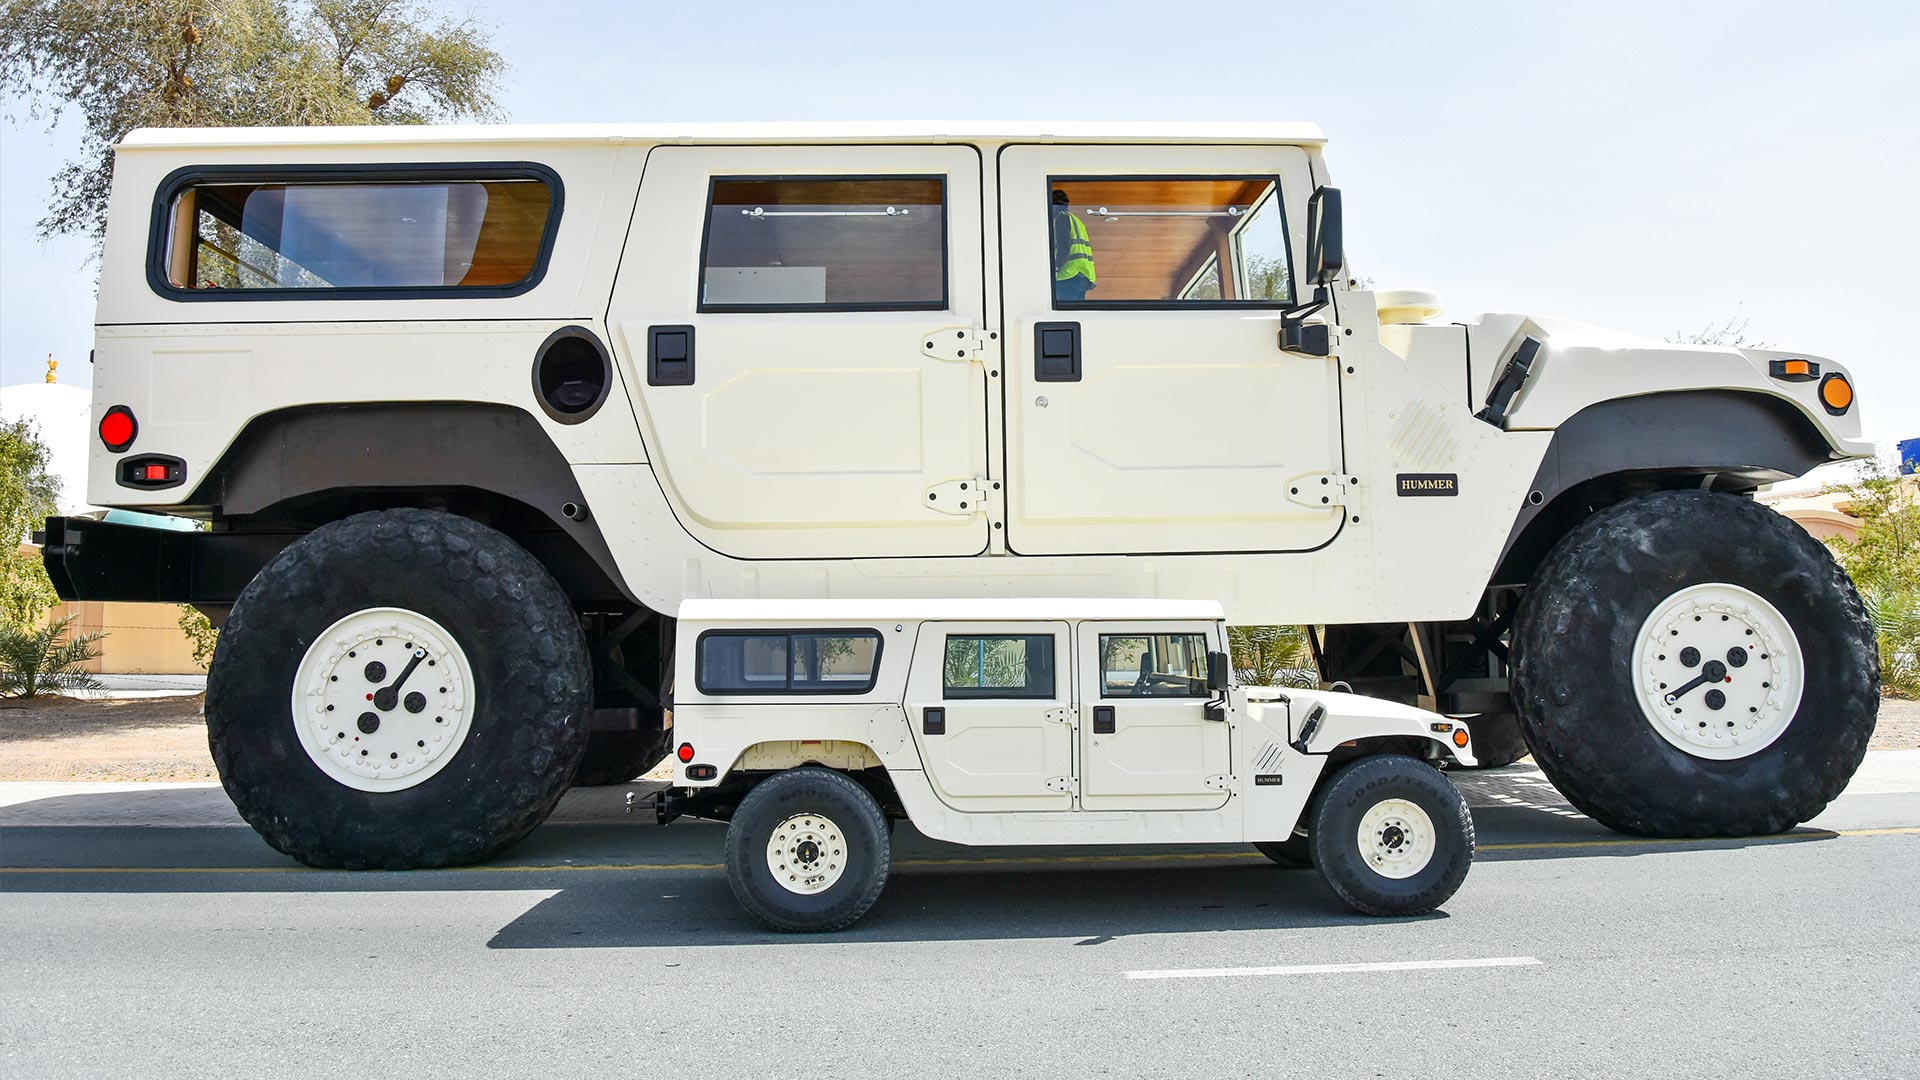 Meet the Biggest Hummer in the World